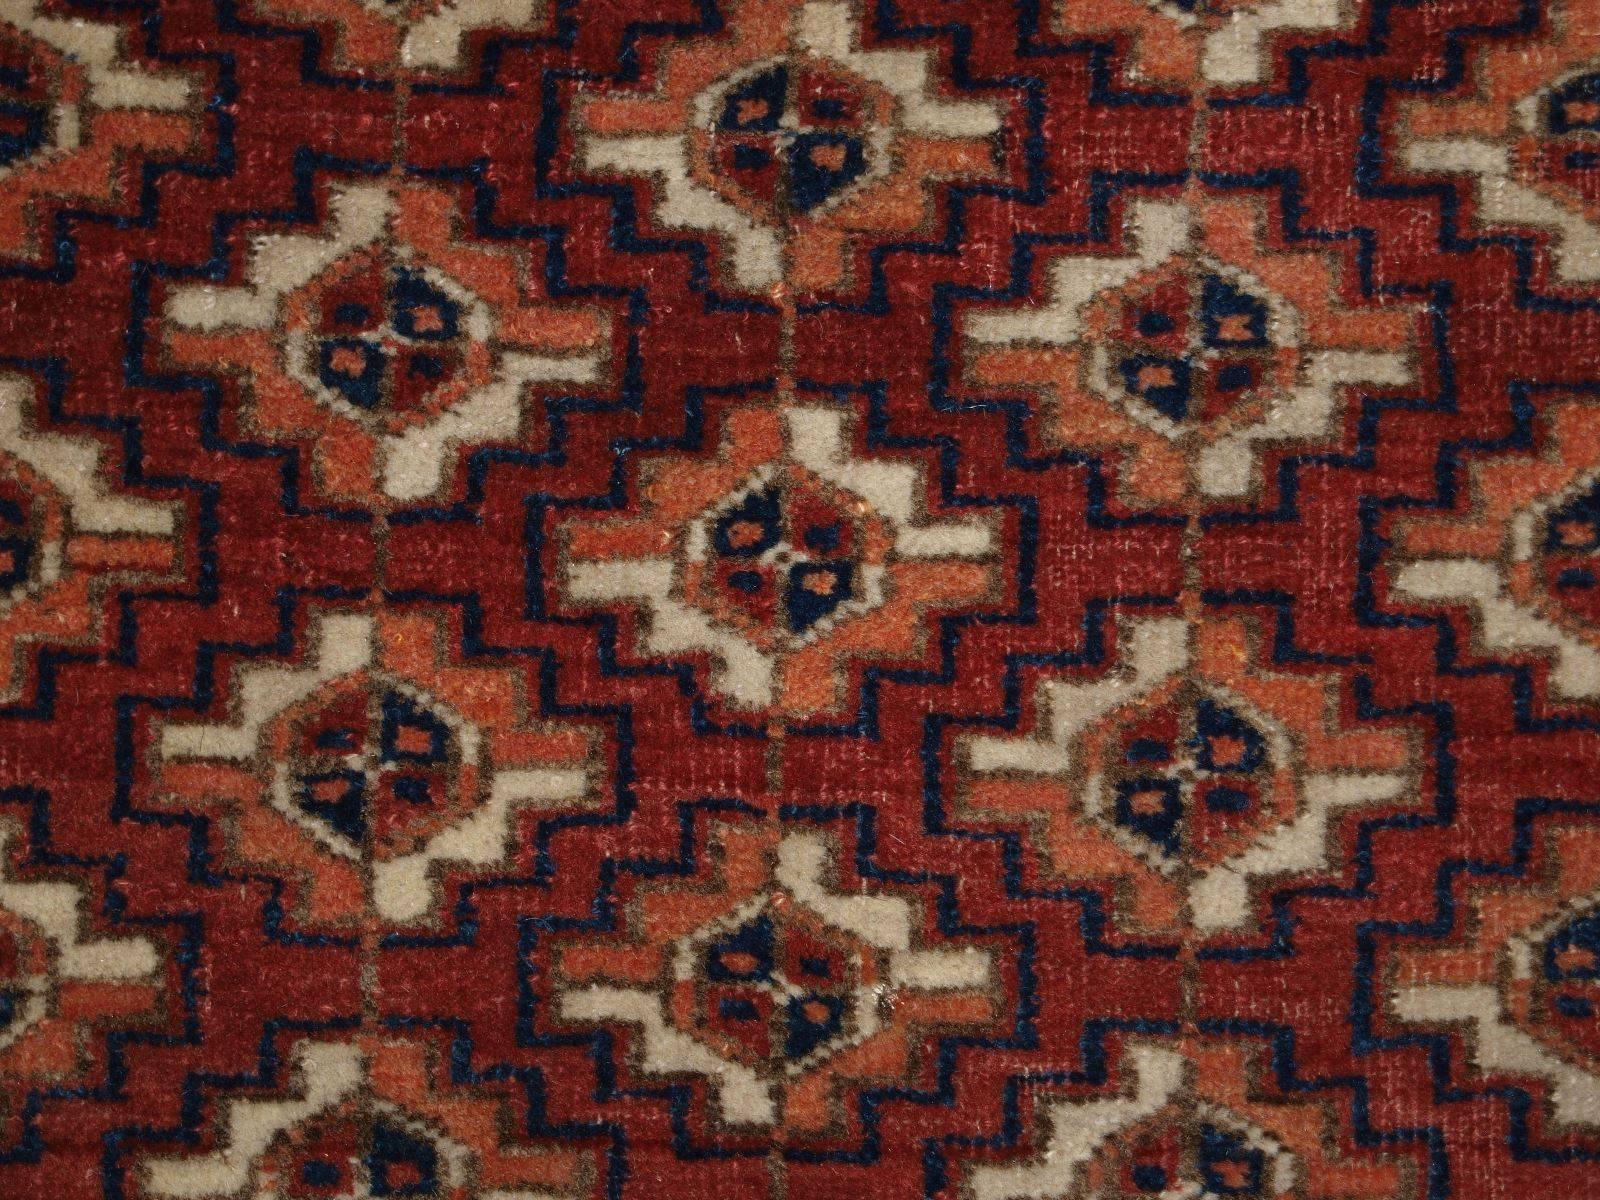 Antique Tekke Turkmen small square dowry rug with chuval guls, circa 1900
Size: 3ft 9in x 3ft 5in (114 x 104cm).

Antique Tekke Turkmen rug of small square size, these rugs are generally considered to be ‘dowry’ weavings, 

circa 1900.

This